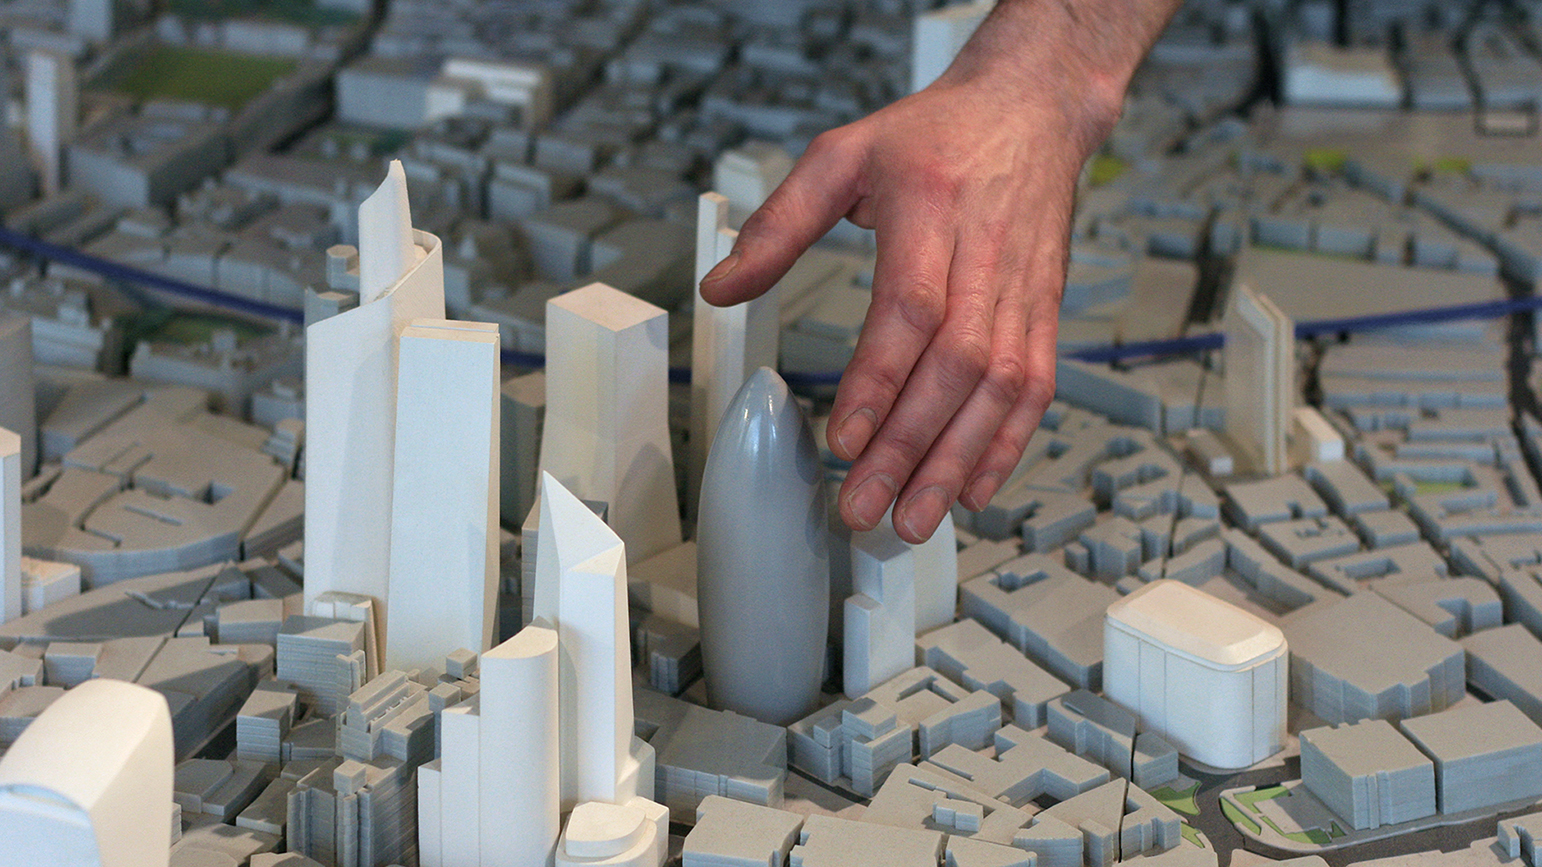 An image of a hand reaching down into a small-scale model city